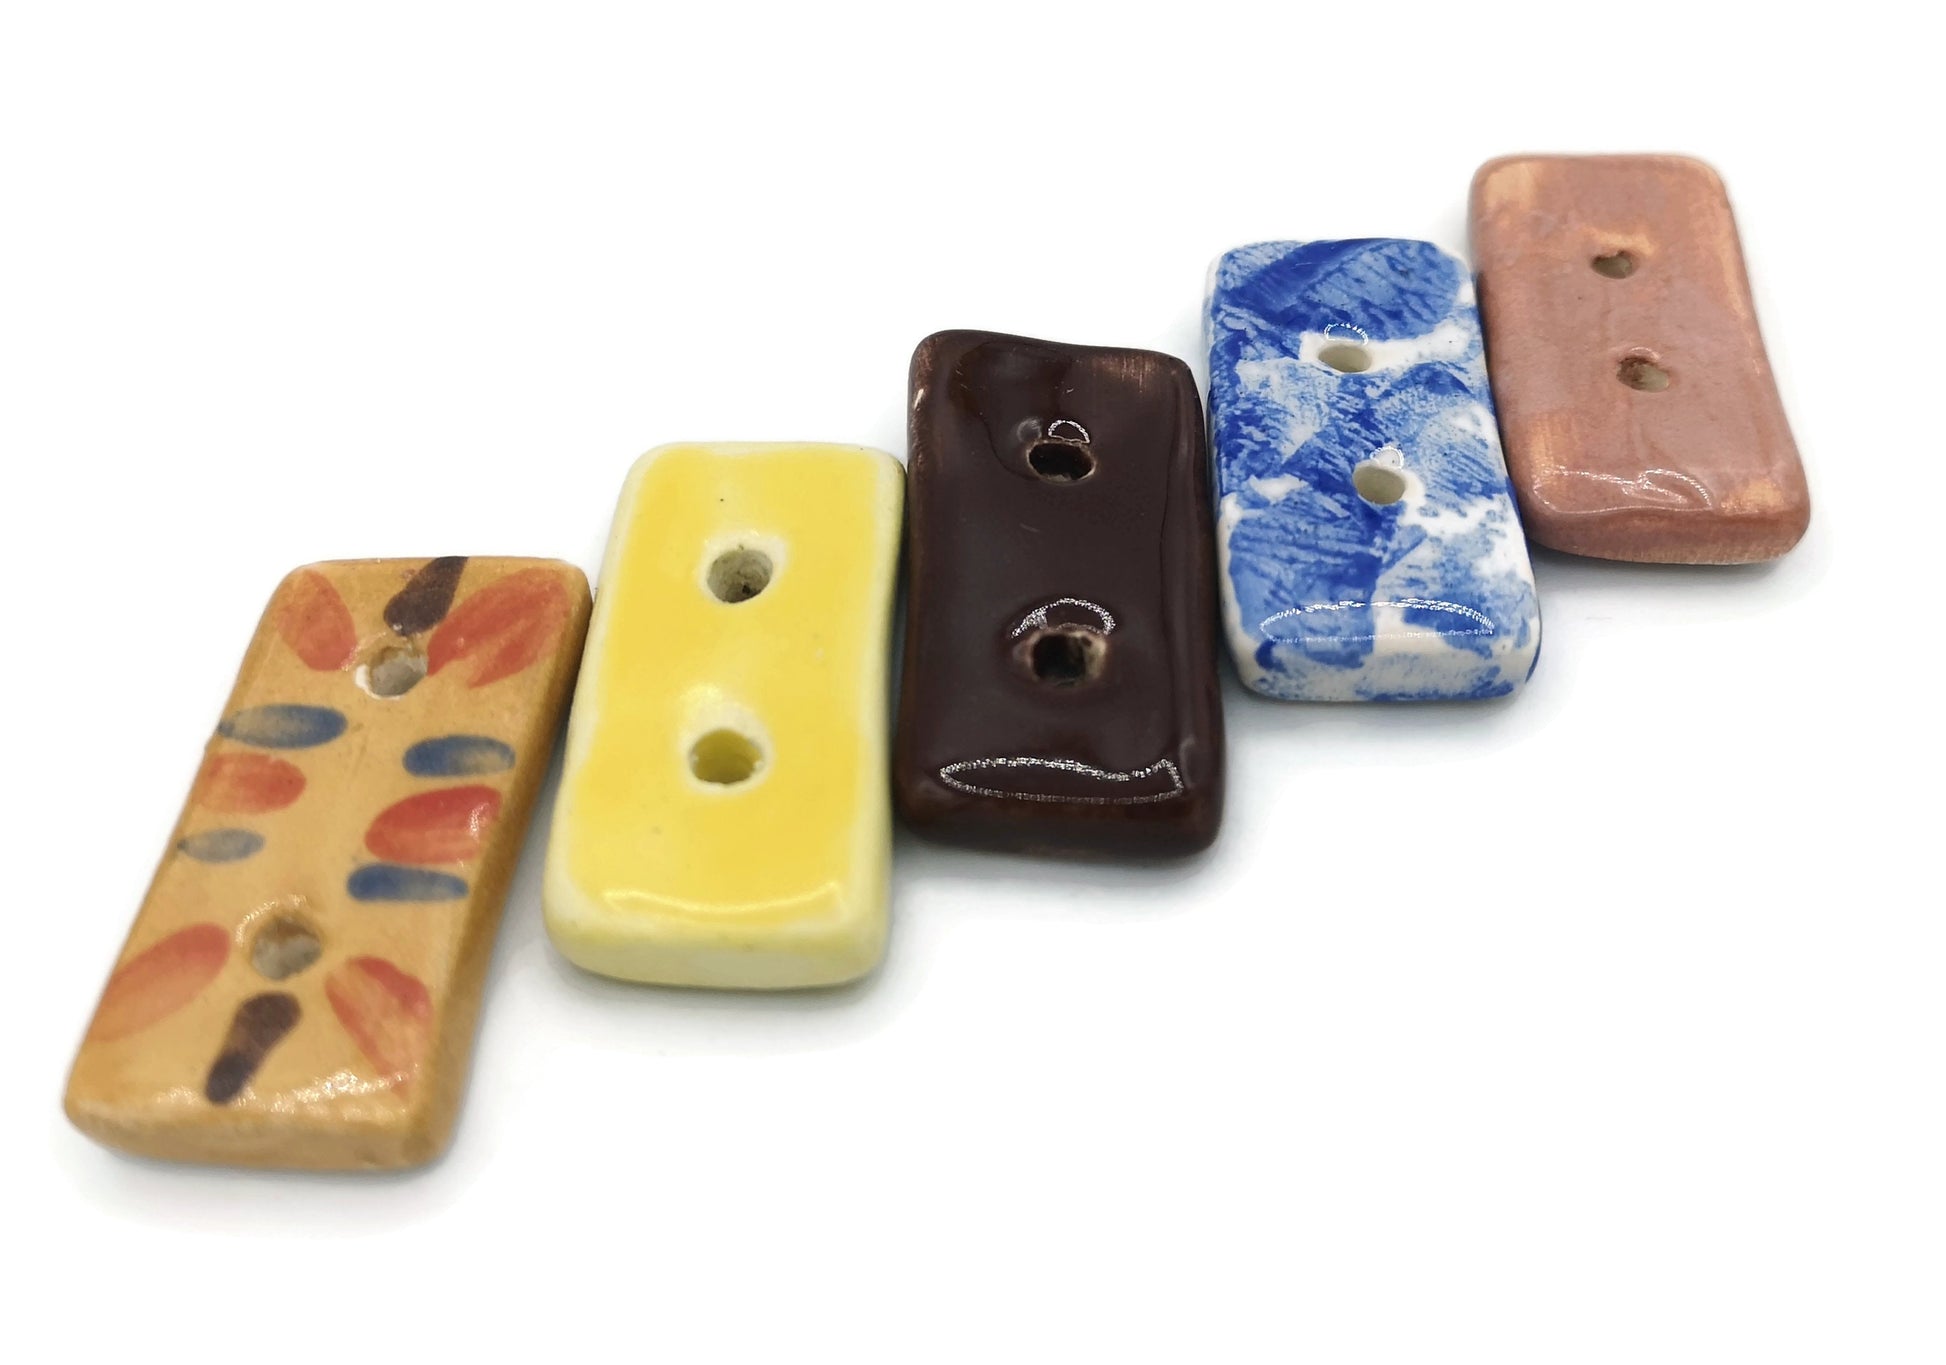 5Pc 40mm Assorted Large Rectangular Sewing Buttons For Crafts, Novelty Sewing Supplies And Notions, Handmade Ceramic Coat Buttons - Ceramica Ana Rafael